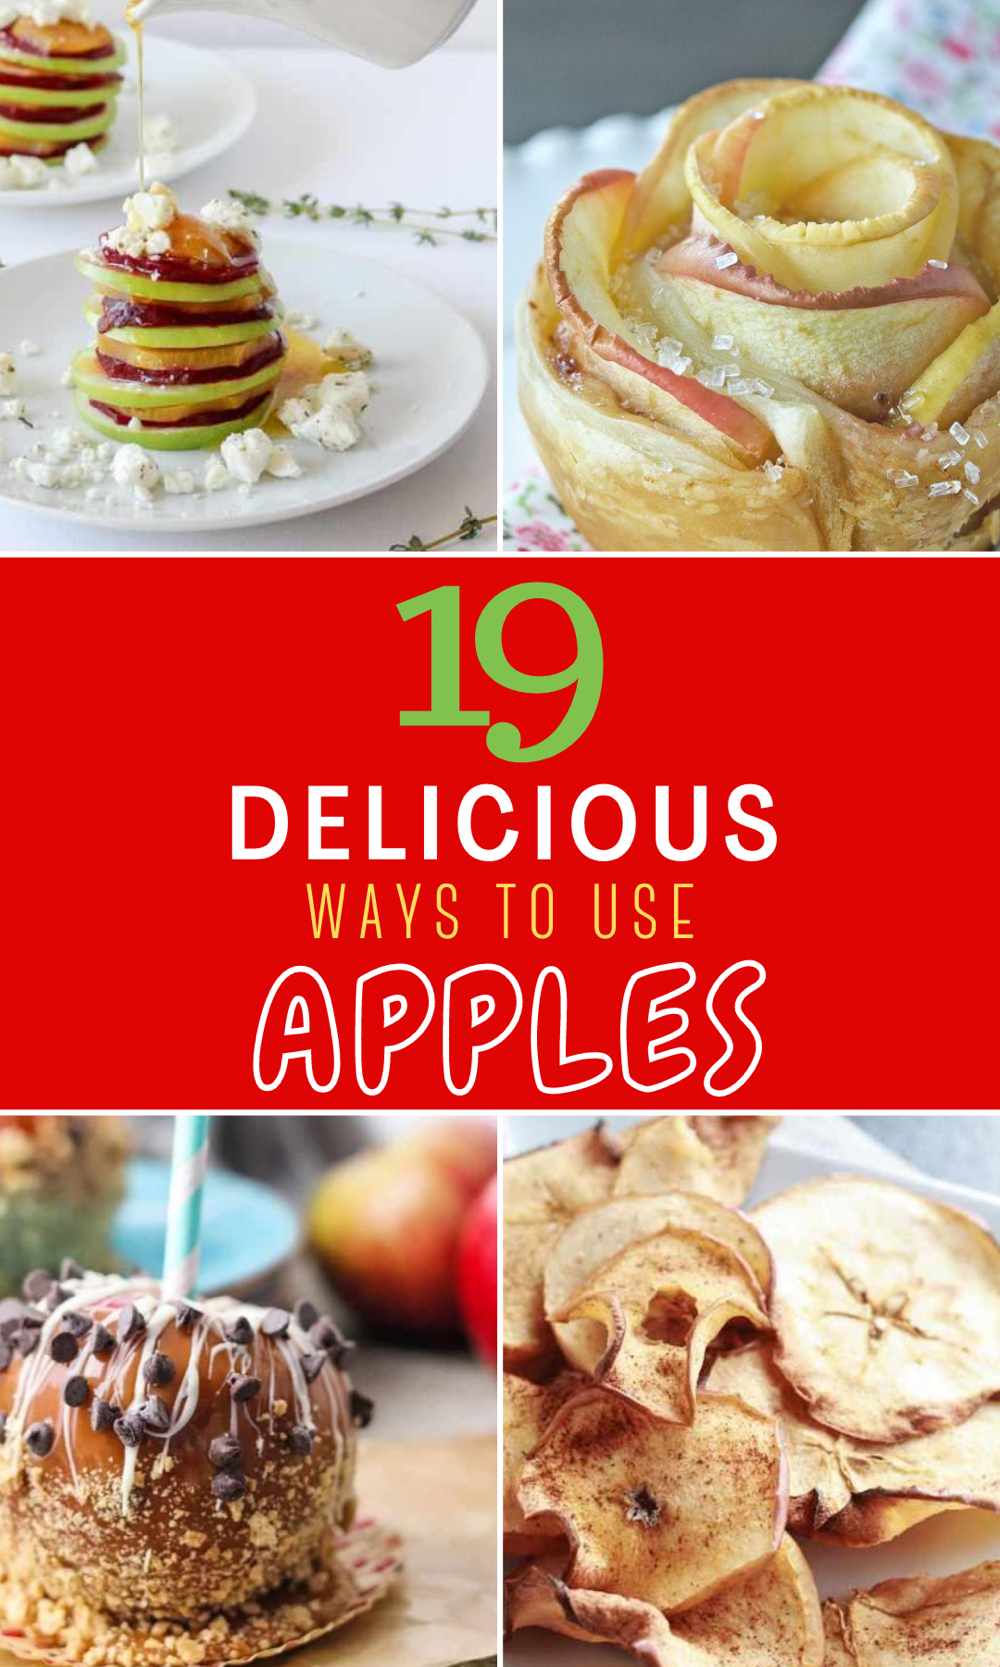 19 Delicious Ways To Use Apples collage image.